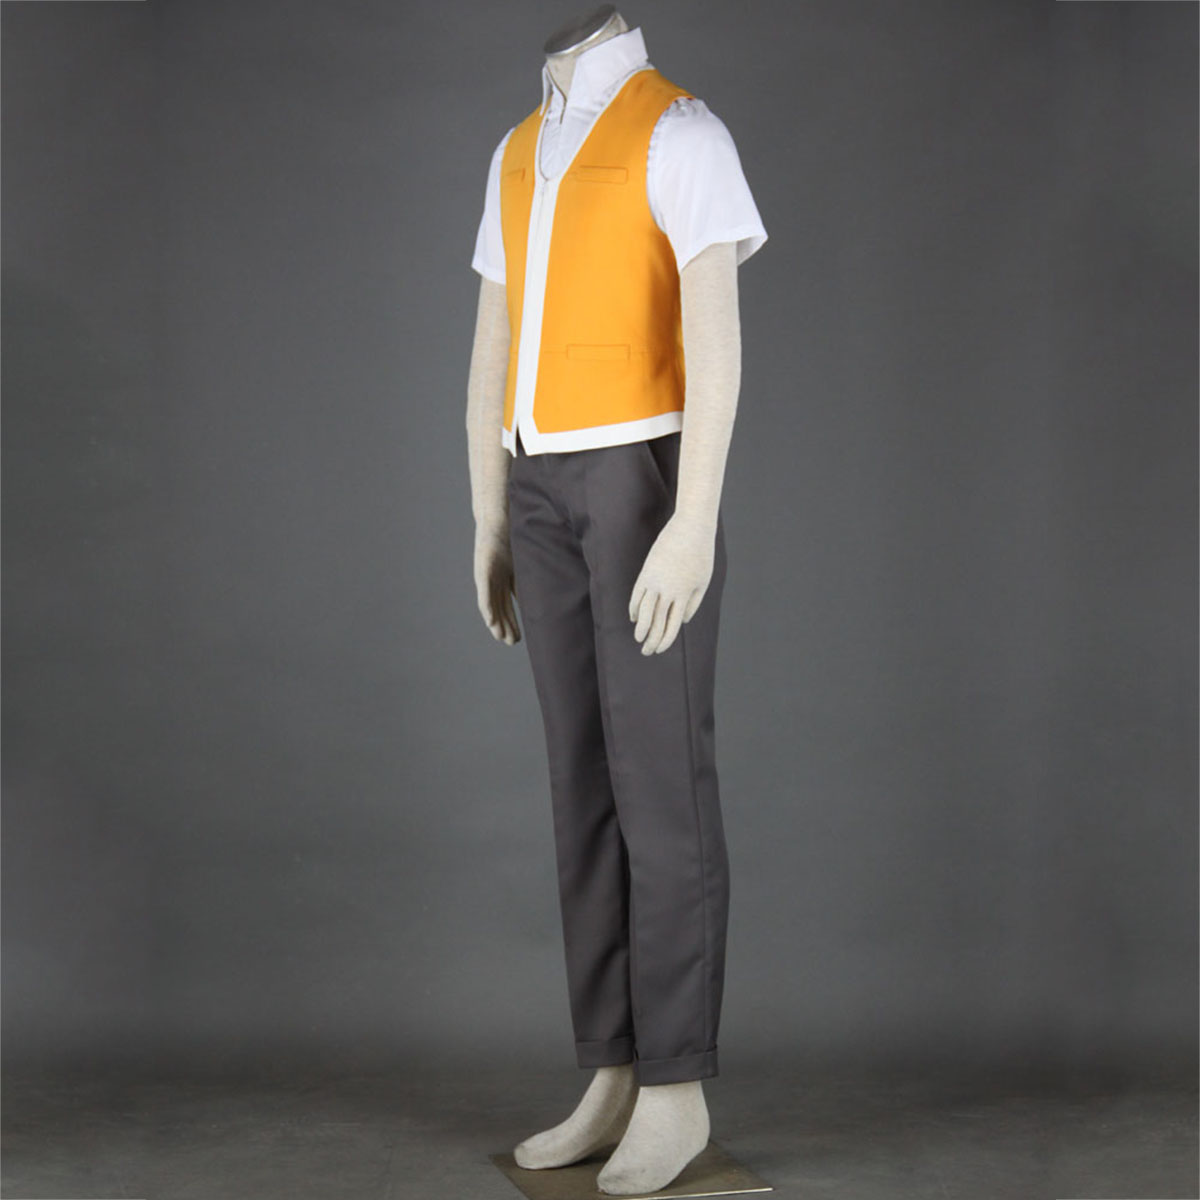 My-HiME Male School Uniforms Cosplay Costumes AU